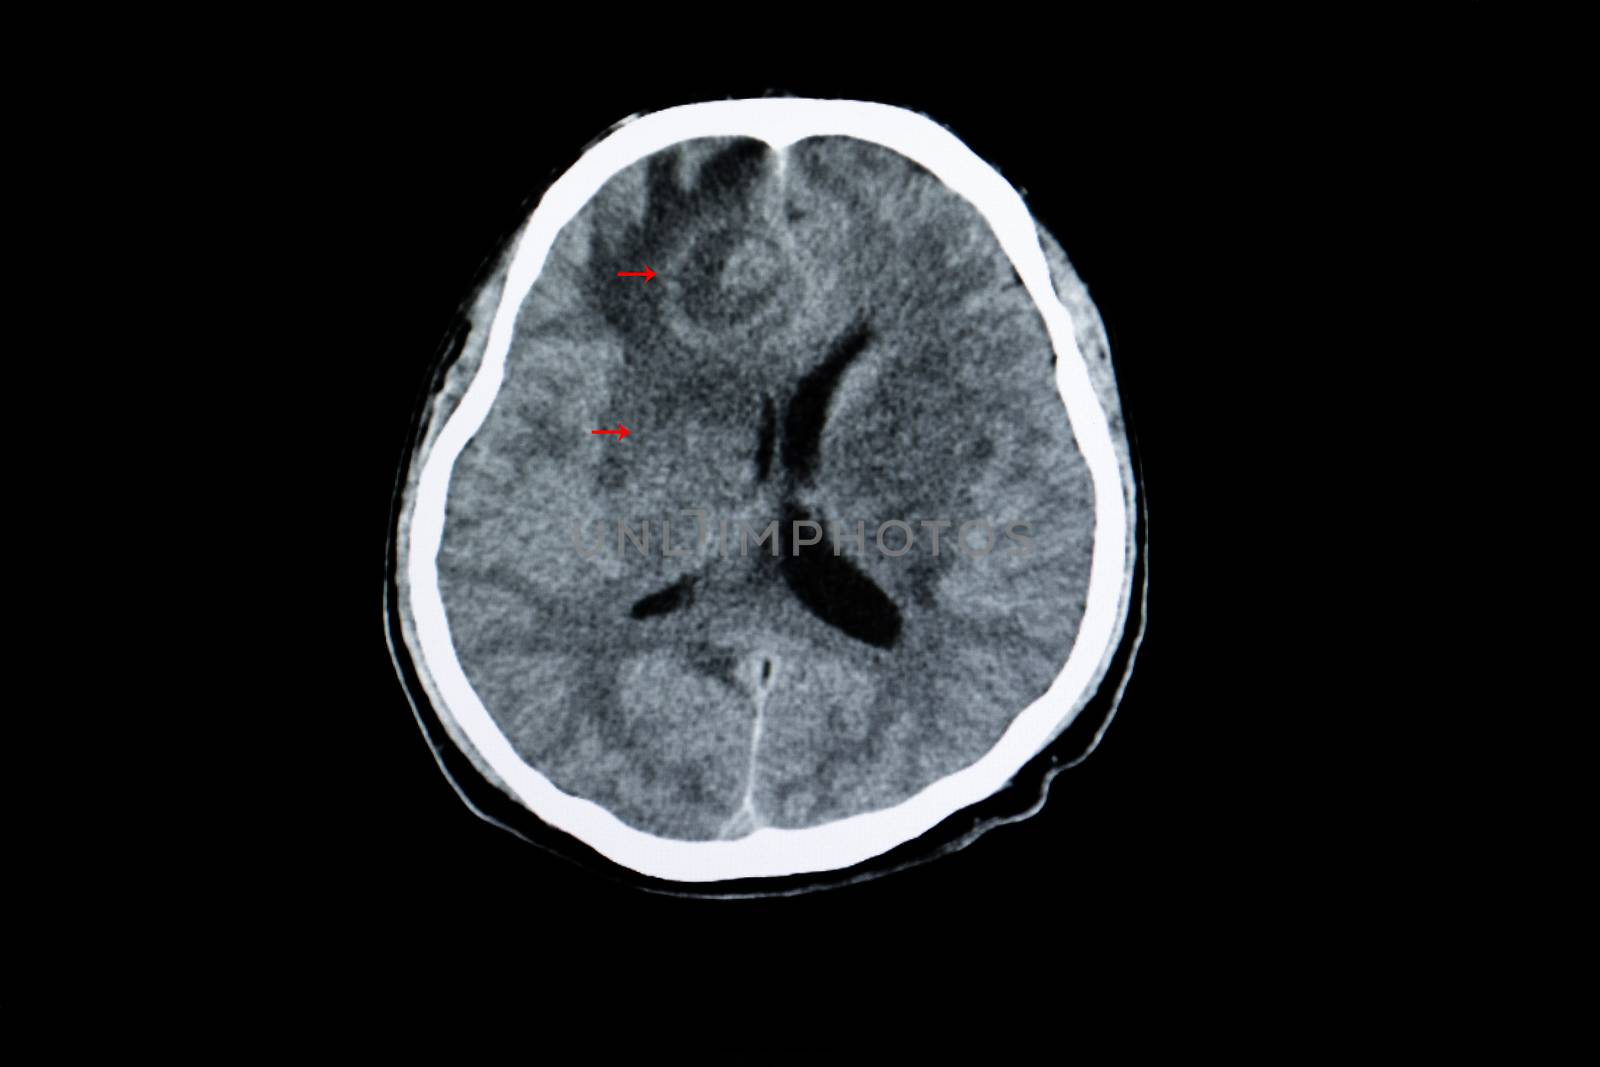 CT scan of a brain of an HIV patient with cerebral toxoplasma infection showing brain edema and ring enhancing lesion.